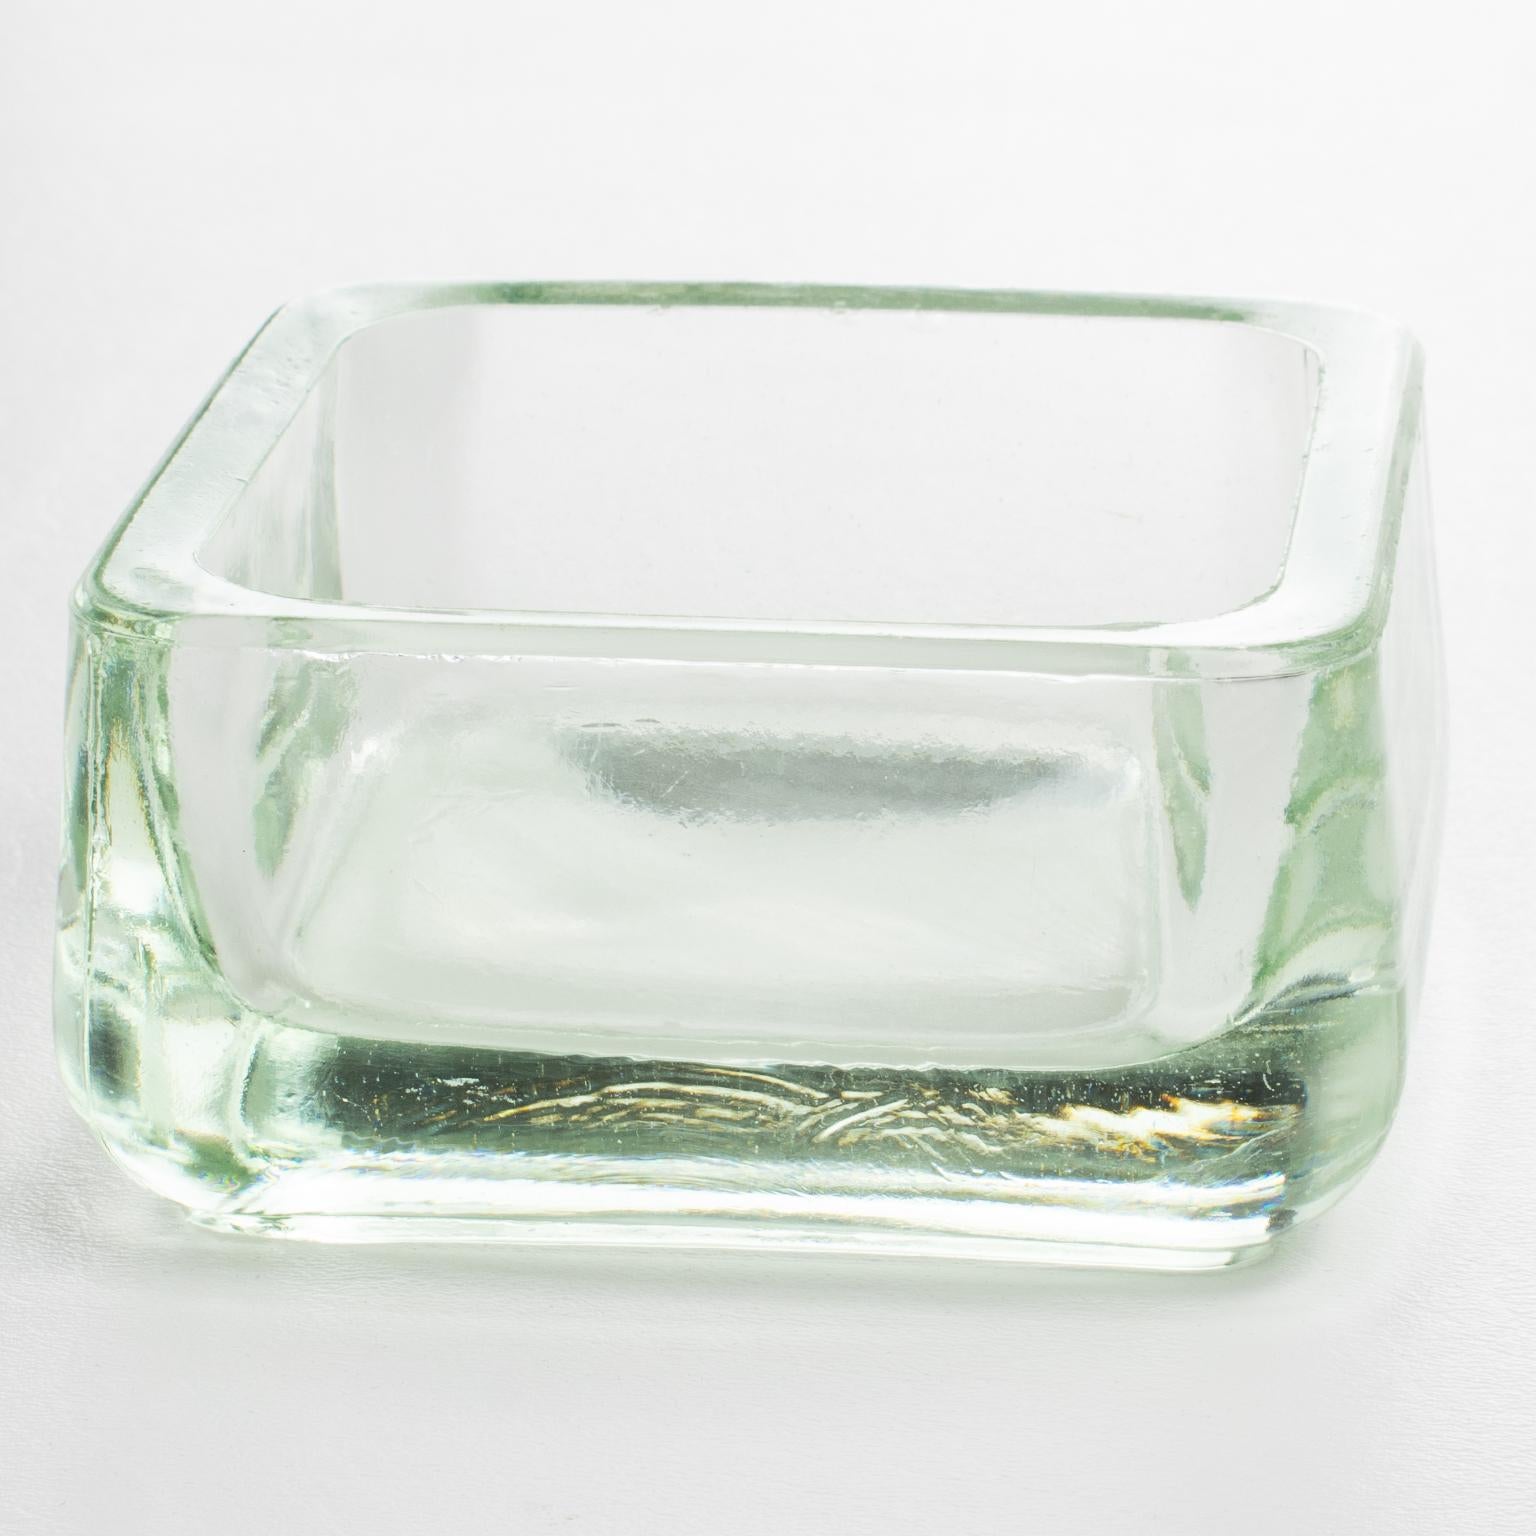 Mid-Century Modern Designed by Le Corbusier for Lumax Molded Glass Desk Accessory Ashtray Catchall For Sale